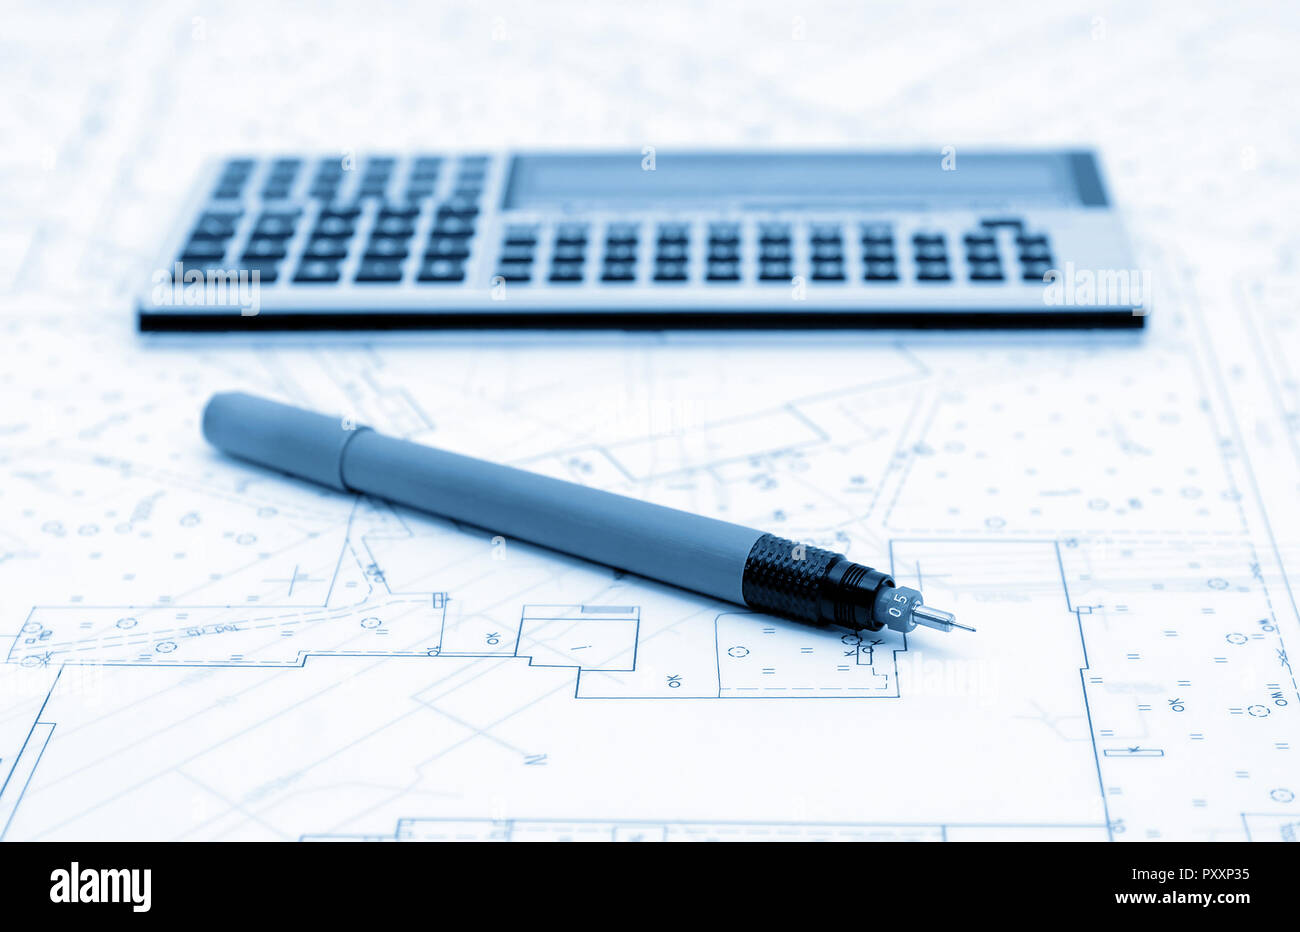 Architectural plans, calculator and drawing utensil. Picture in blue tone. Stock Photo